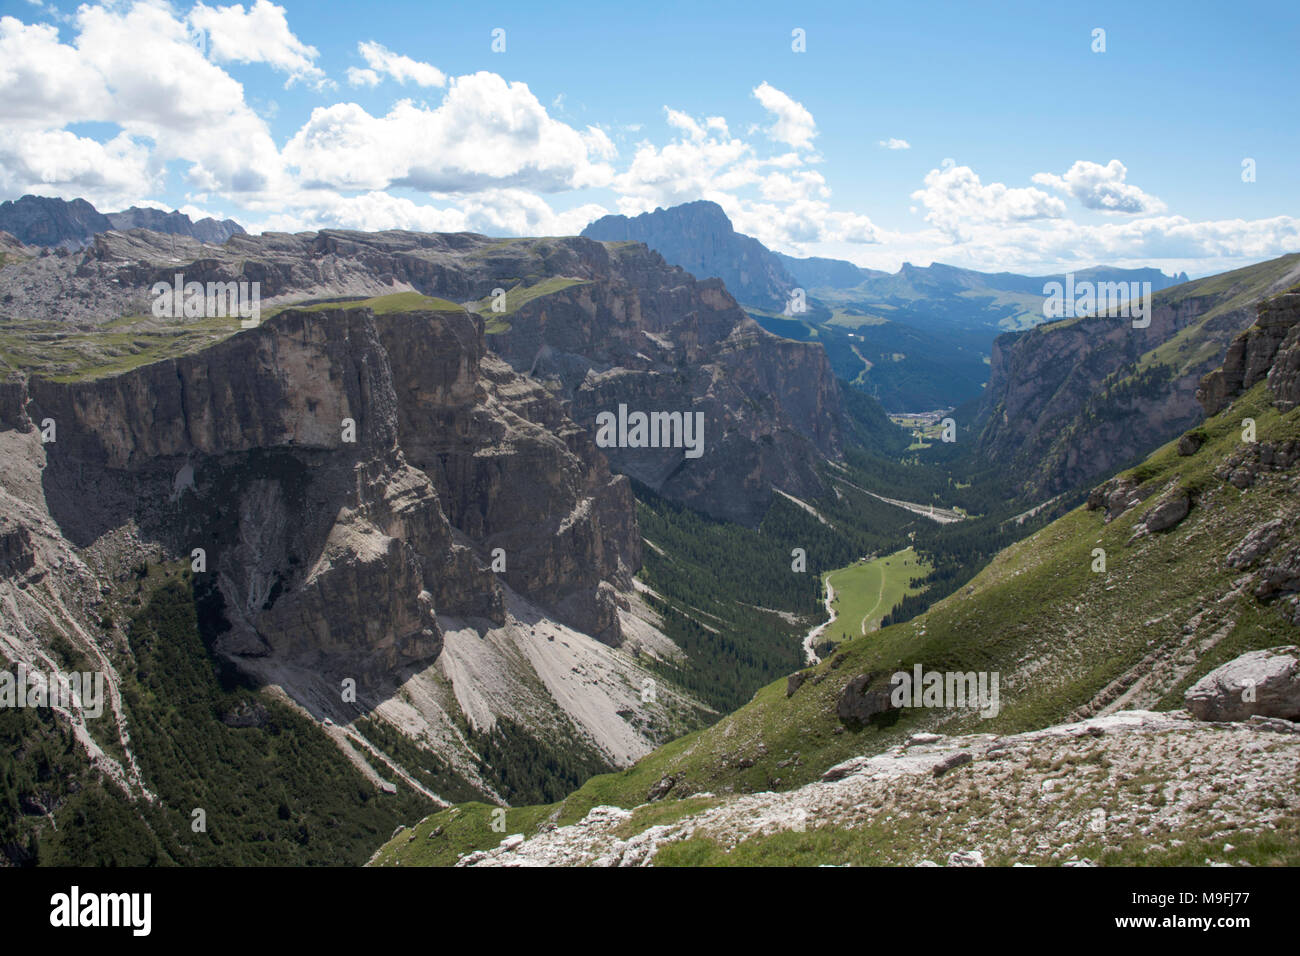 A view looking along the Langental or Vallunga Valley in the  Naturpark Puez-Geisler or Parco Naturale Puez-Odle Selva Val Gardena Dolomites Italy Stock Photo